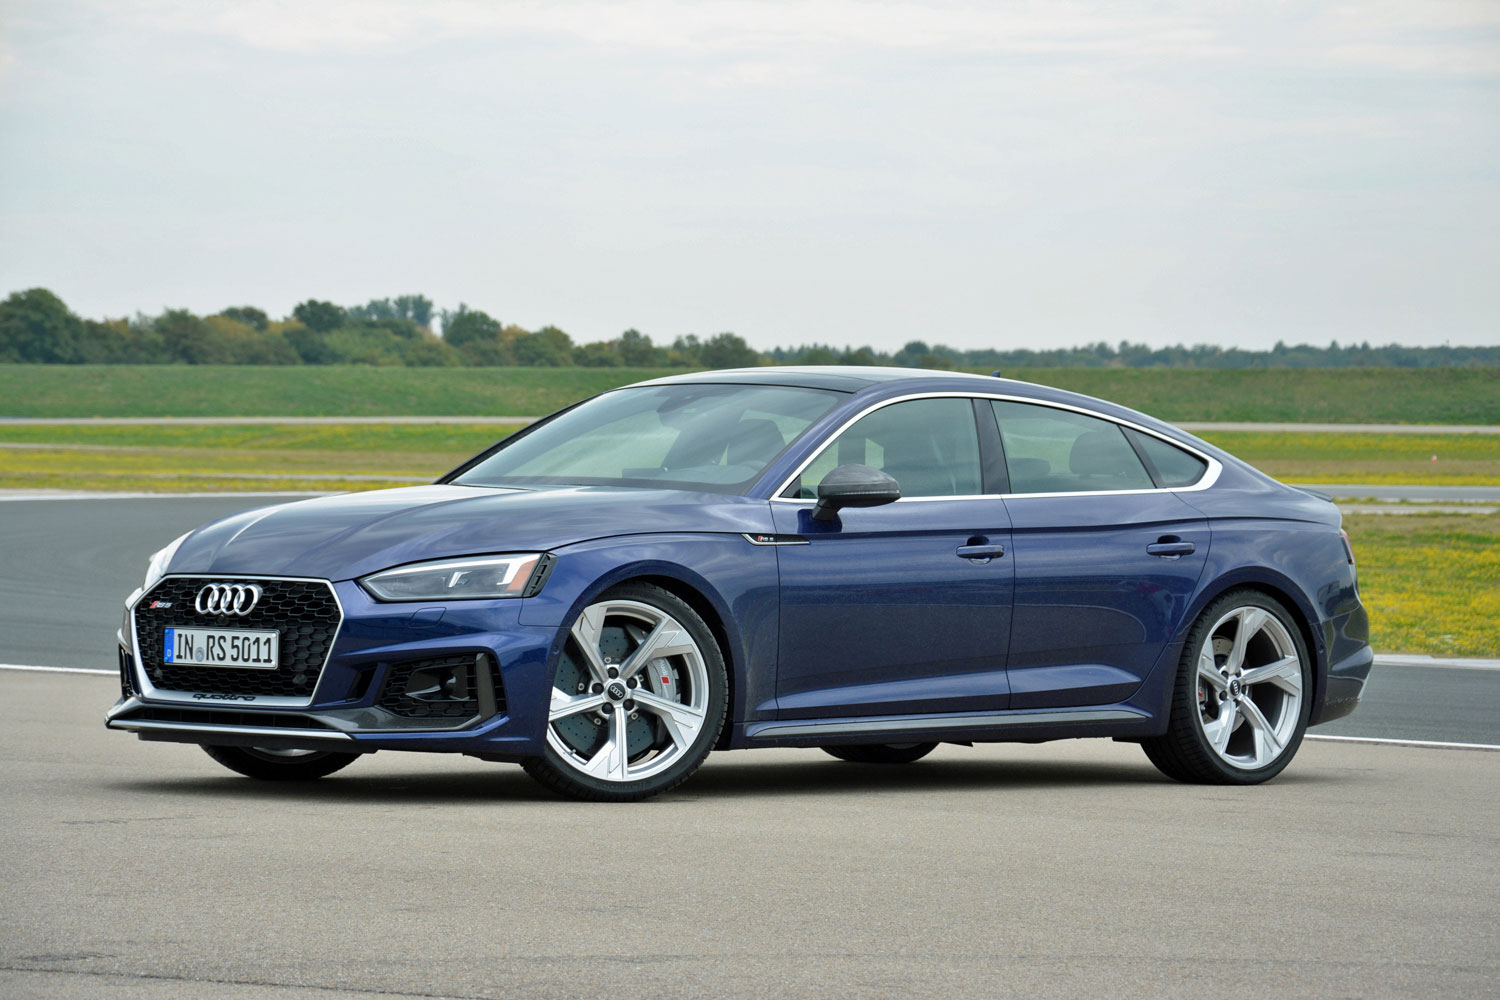 2019 Audi RS 5 Sportback First Drive Review | Digital Trends